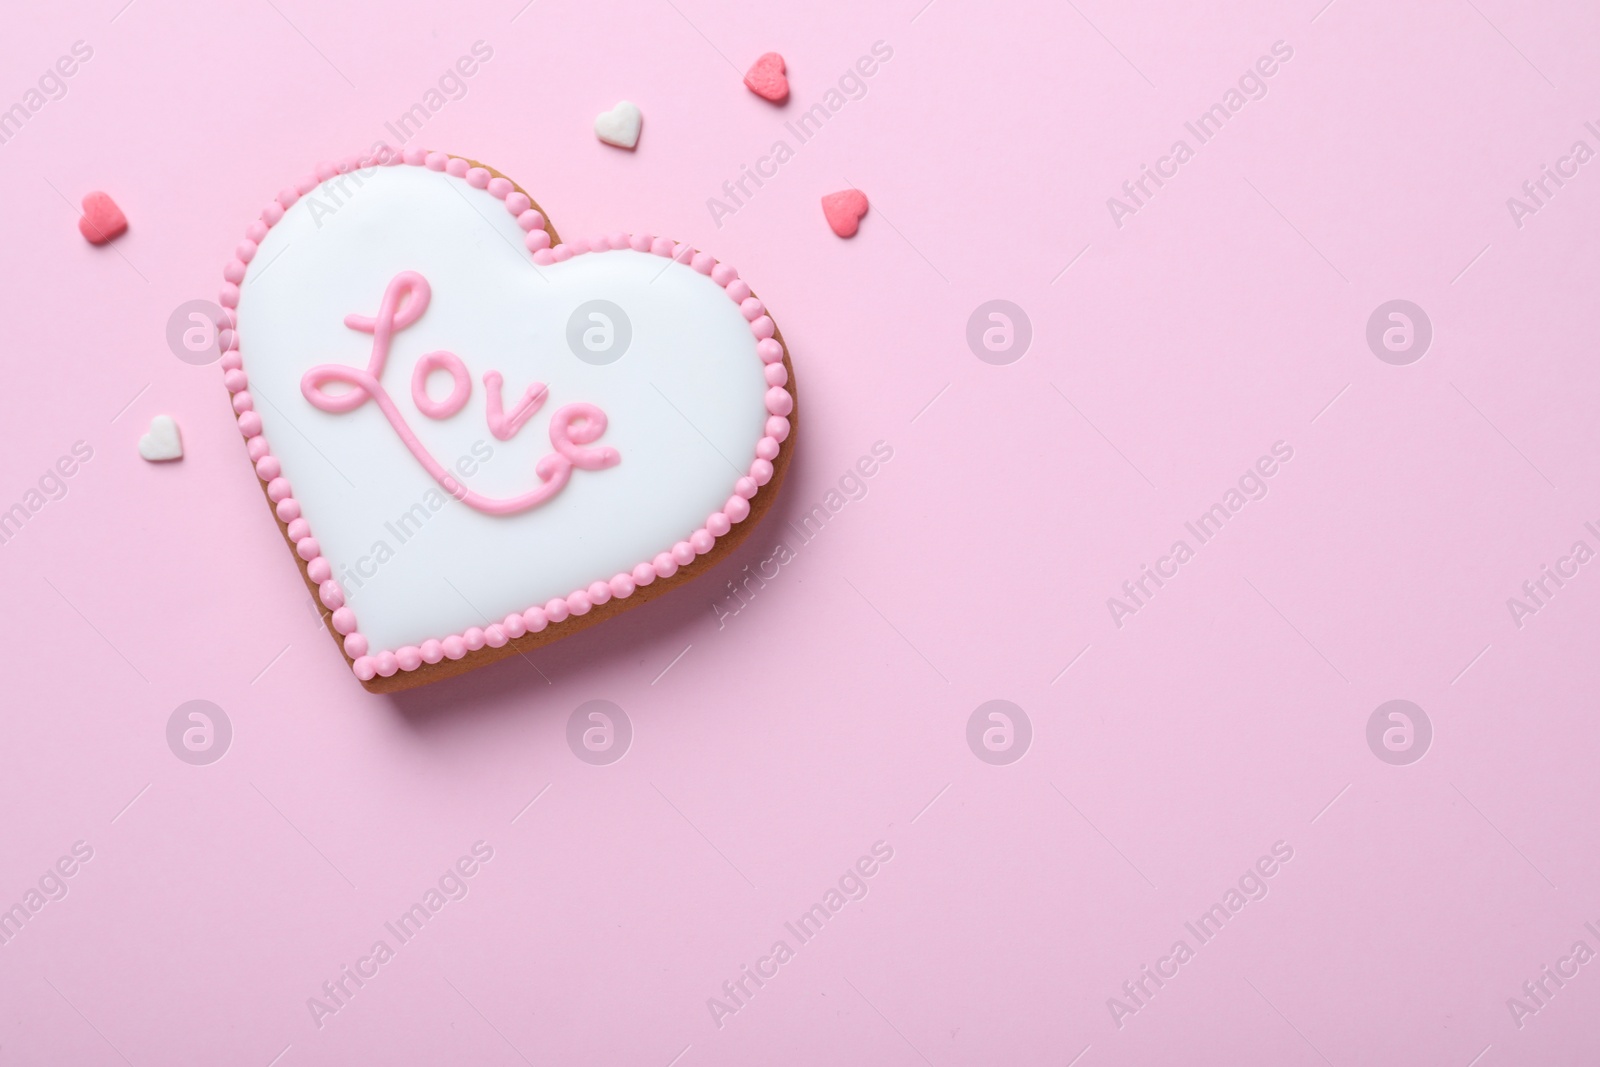 Photo of Heart shaped cookie with word Love on pink background, flat lay and space for text. Valentine's day treat